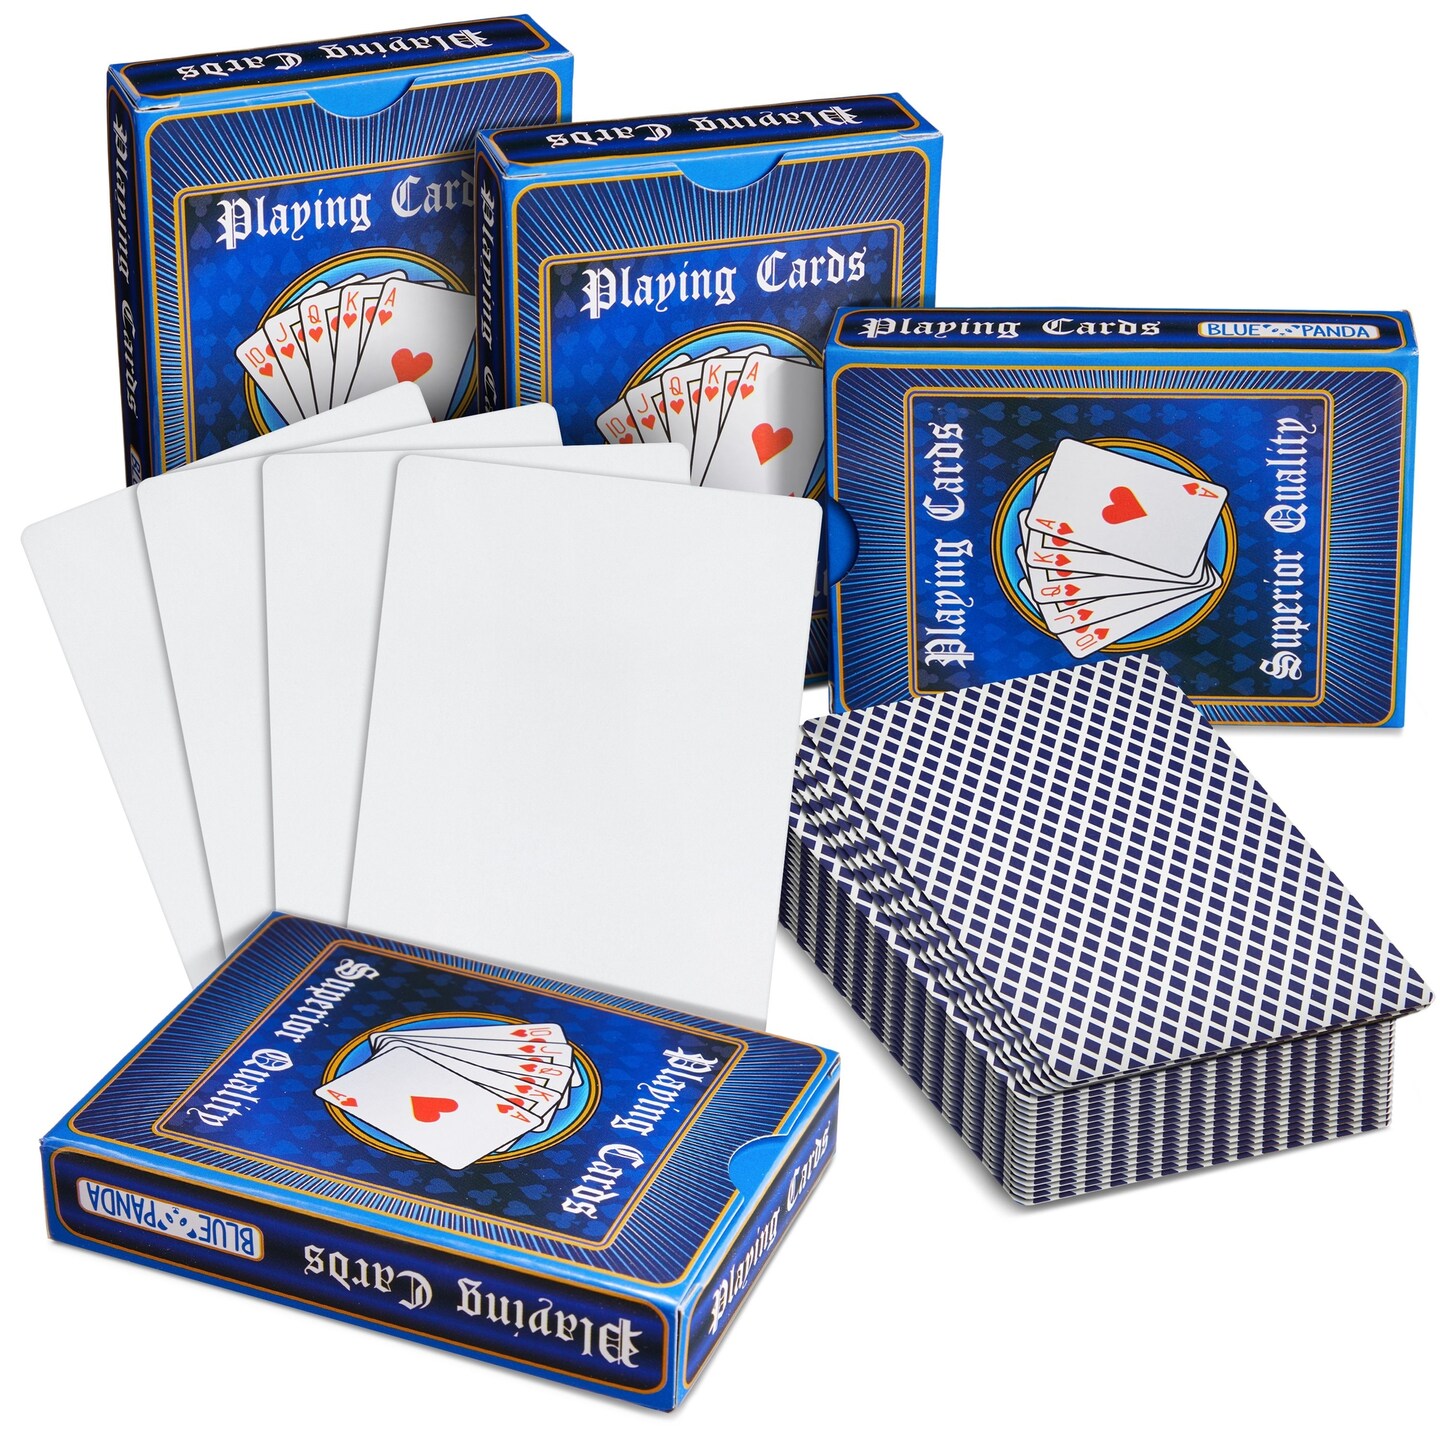 Small blank deck of cards (can sublimation print), Small deck card cases